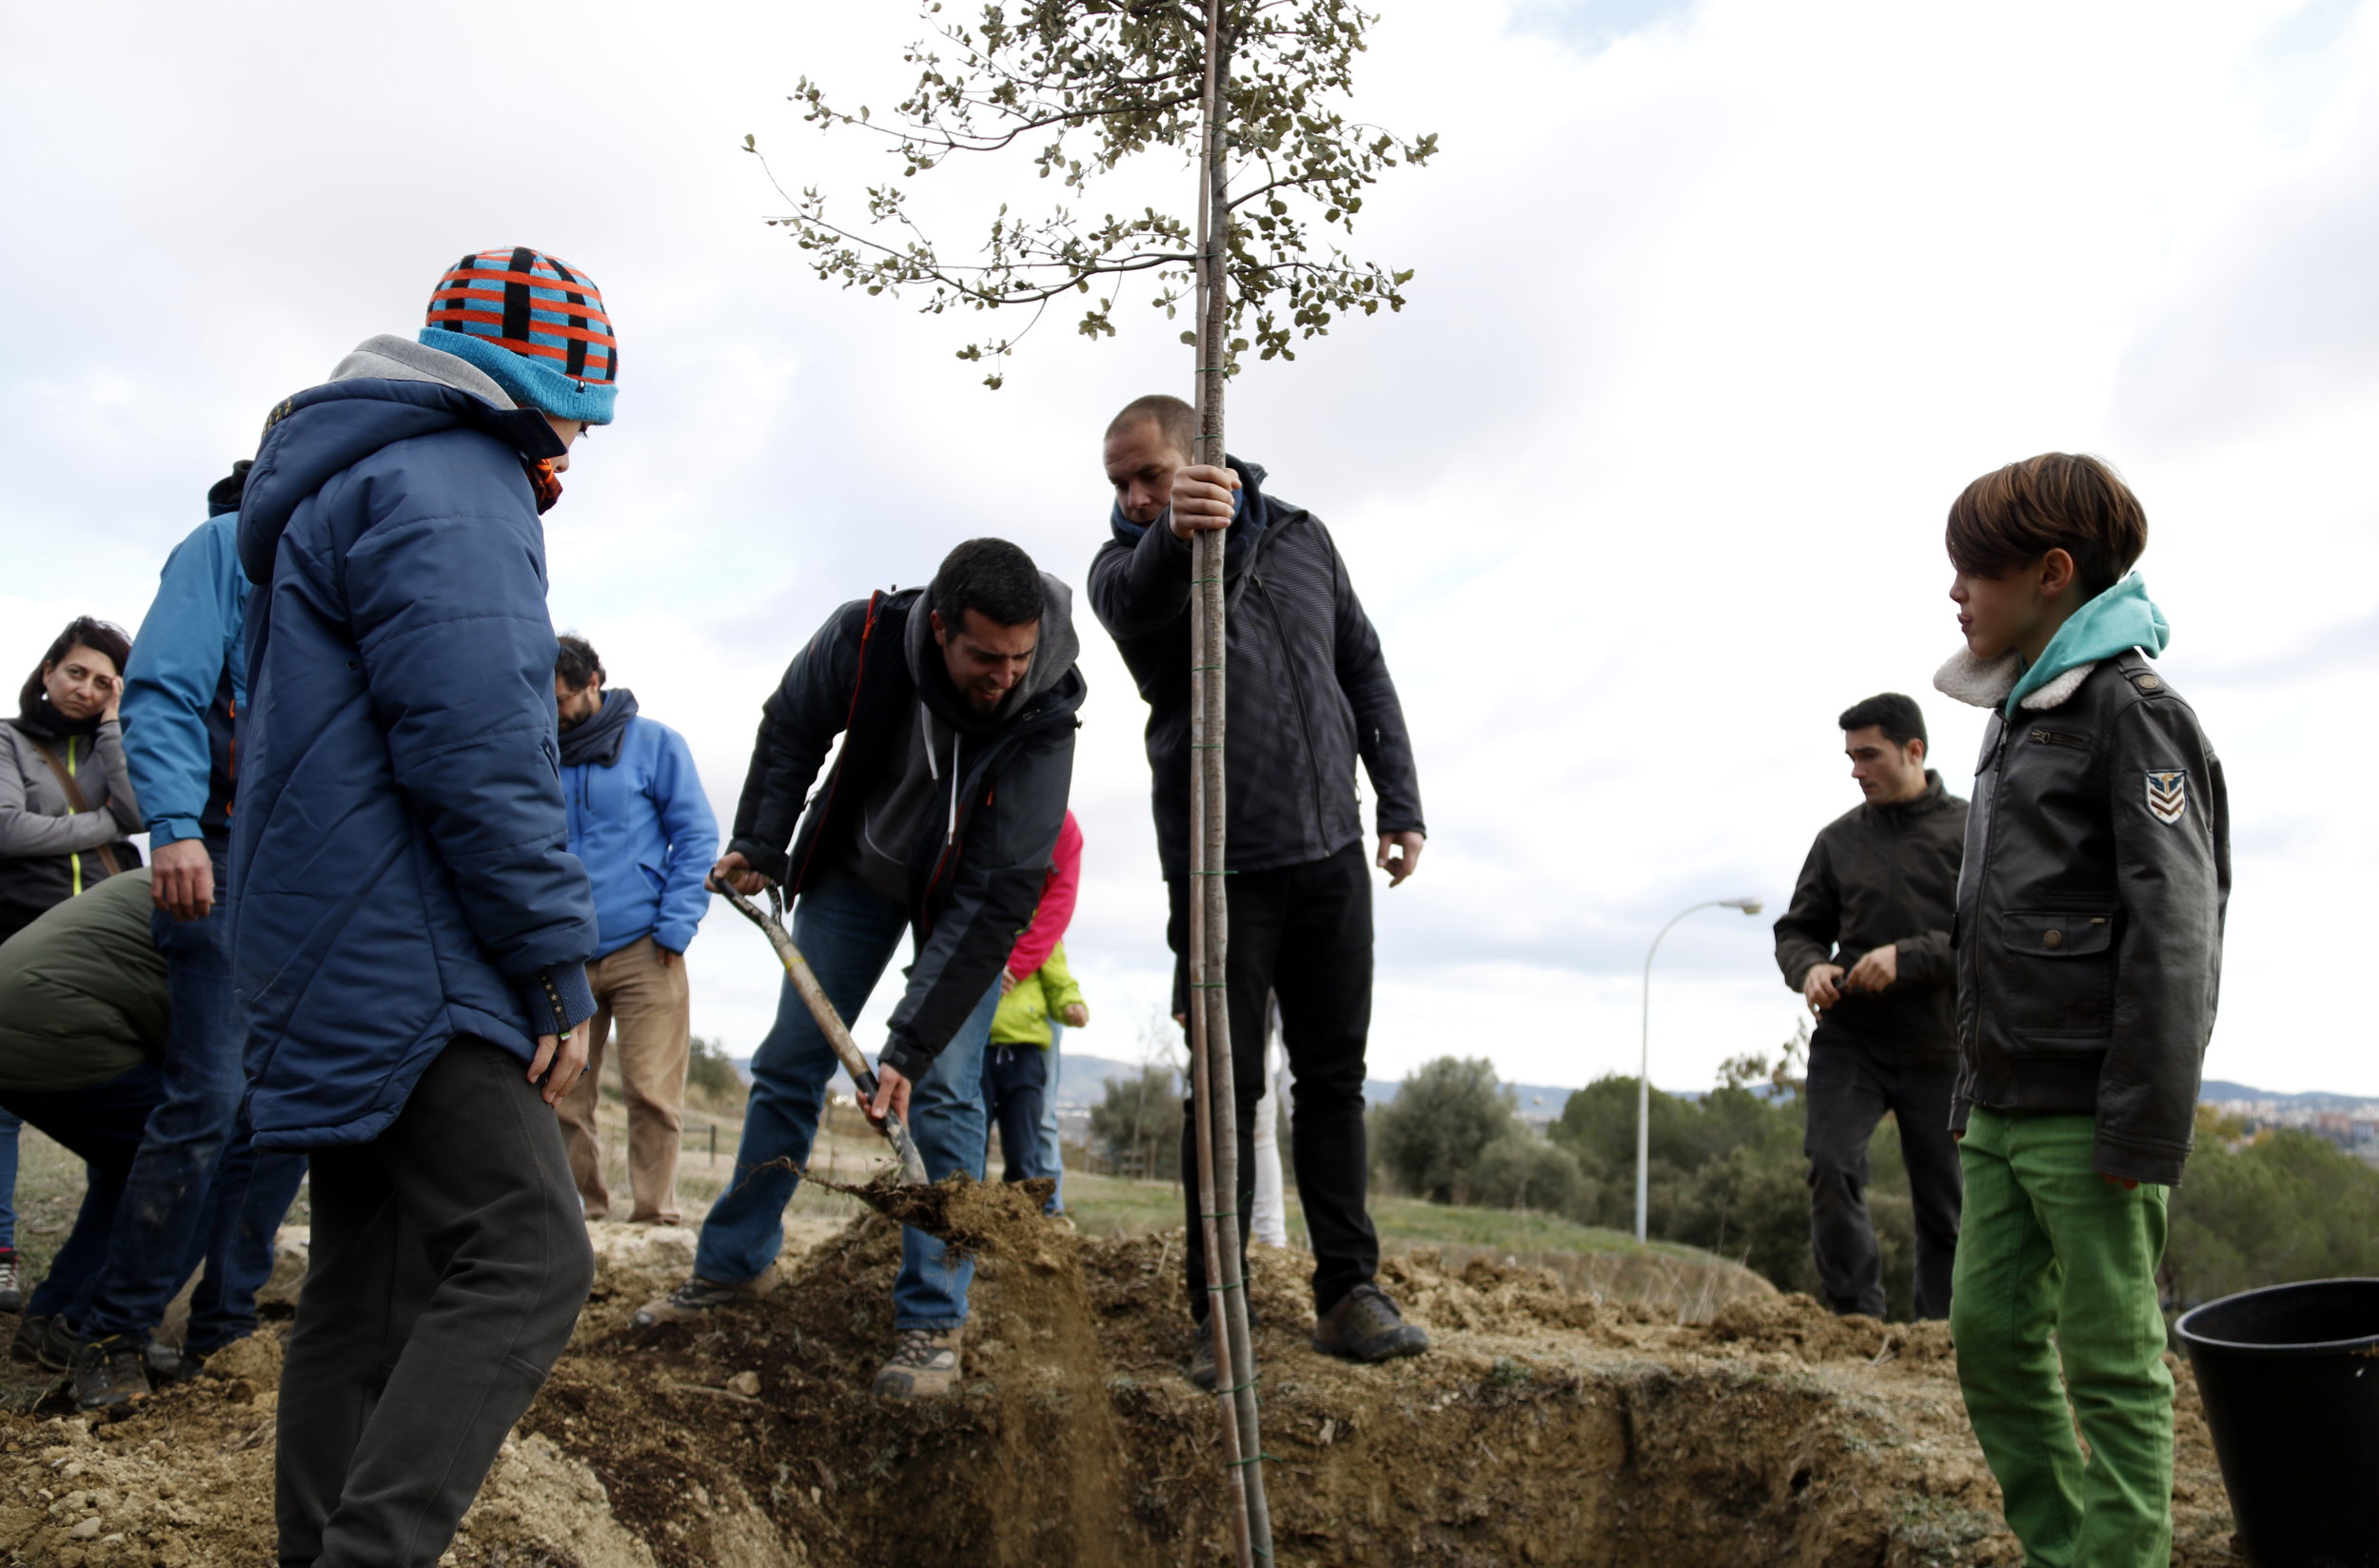 Friends and family planting an oak tree in remembrance of Pau Pérez, victim of the August 17 Barcelona terrorist attack (by ACN)